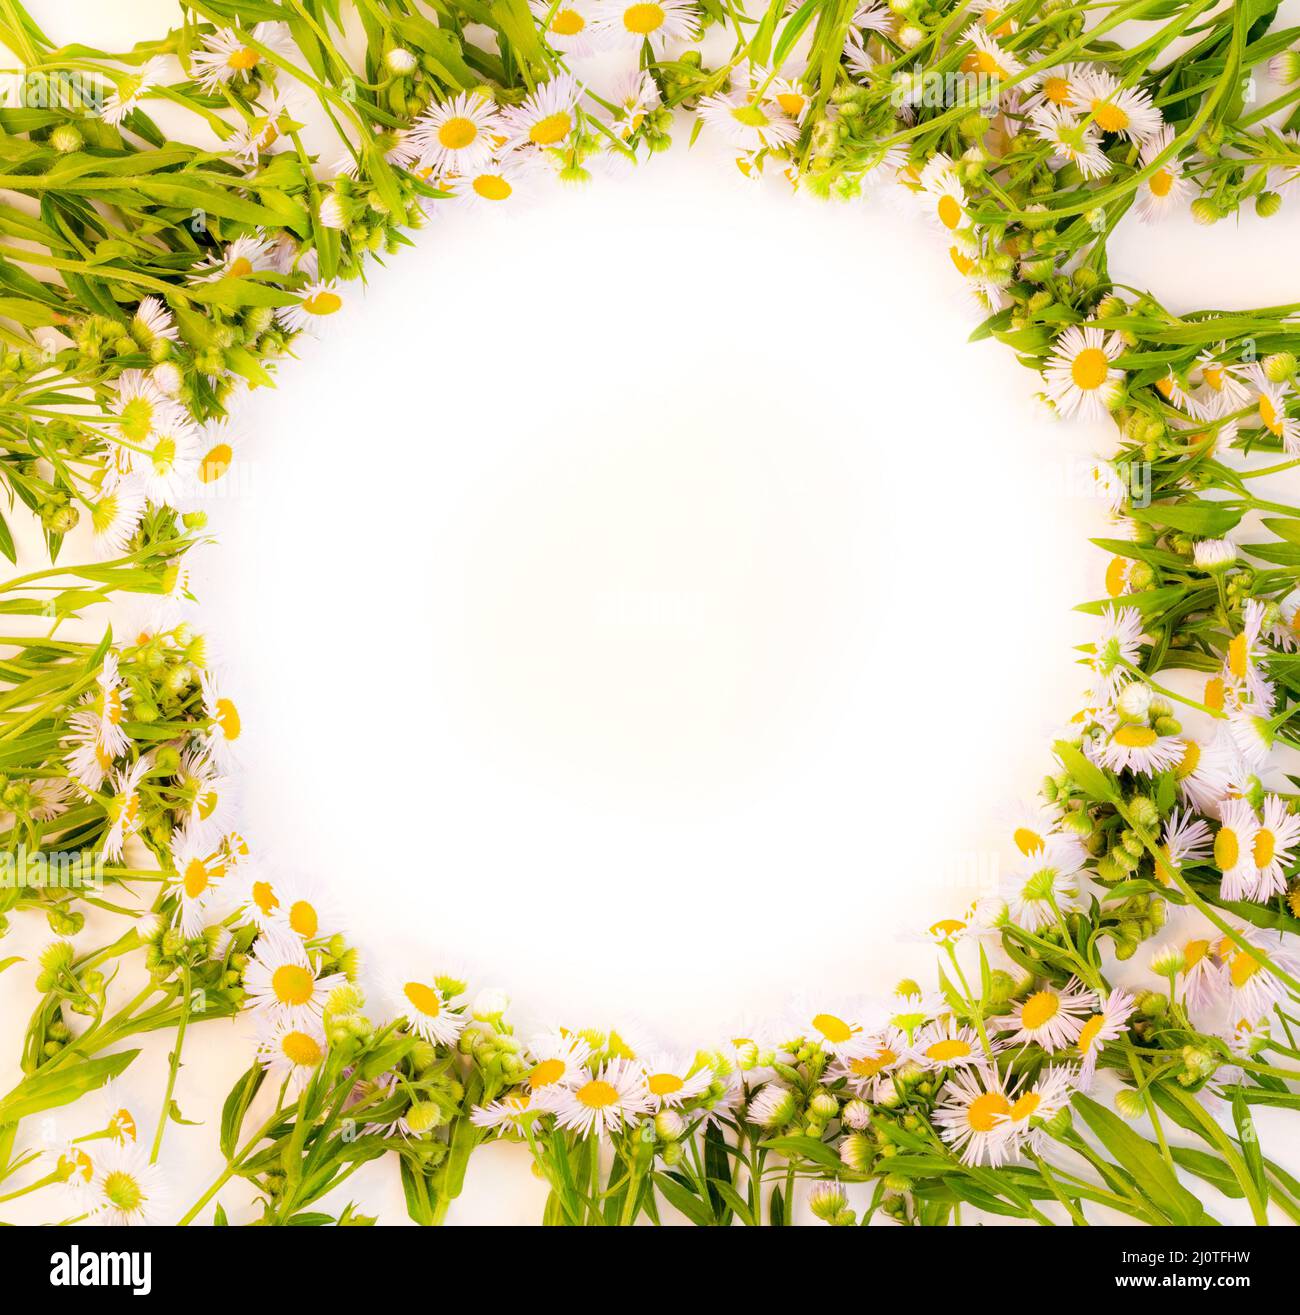 Round frame of daisies bushes on a white background with space for text, Flat lay top view Stock Photo